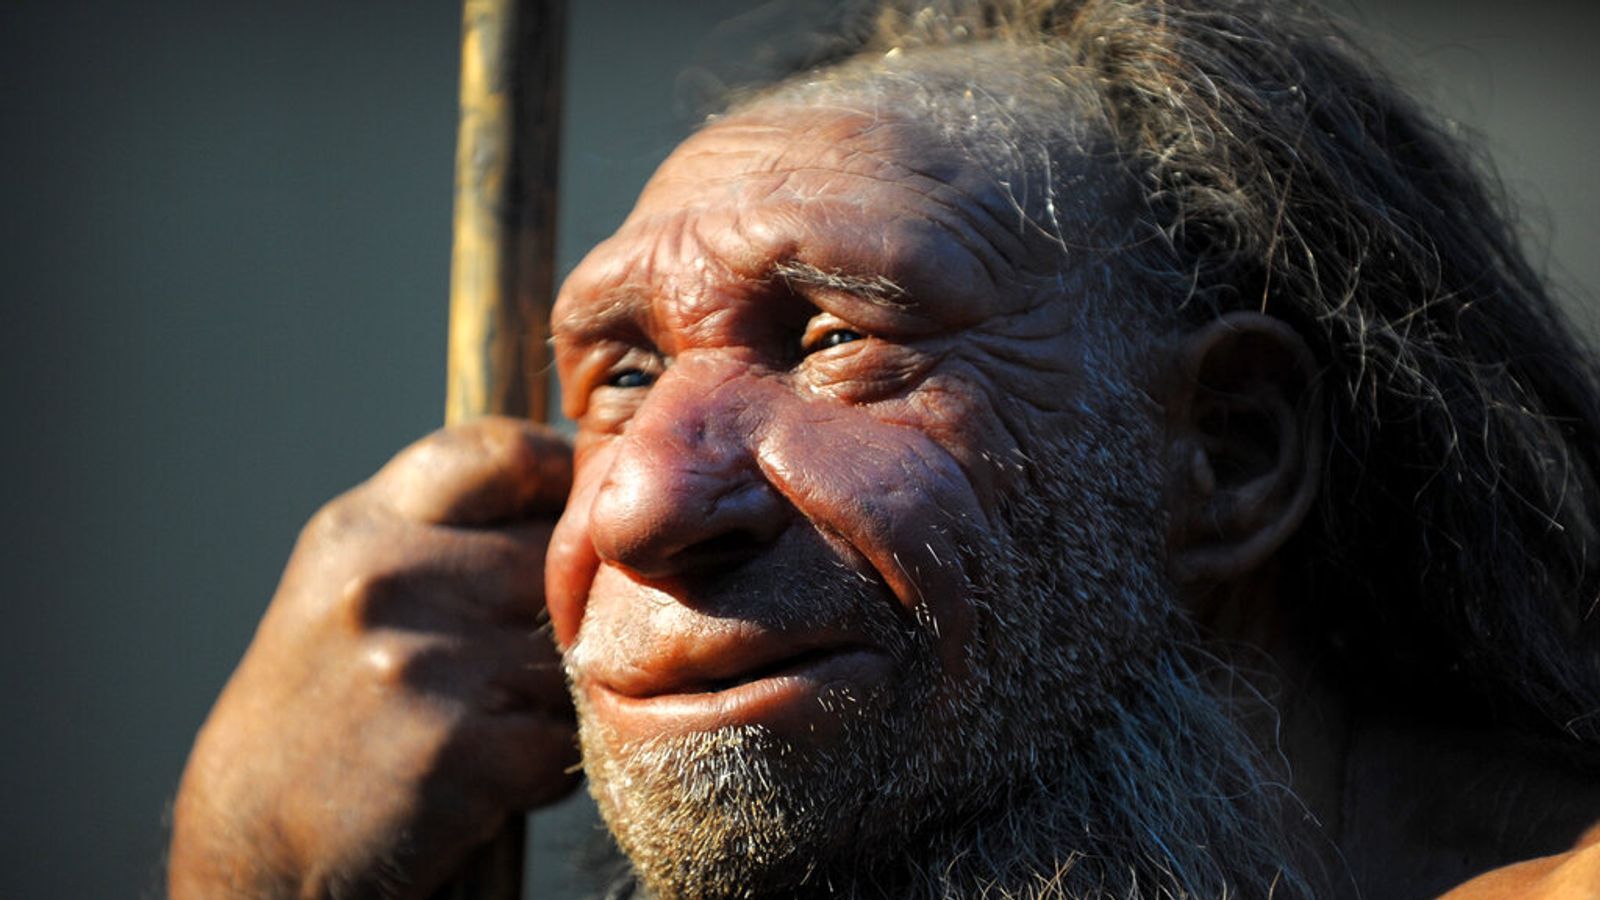 New study reveals how much Neanderthal DNA still exists in modern humans